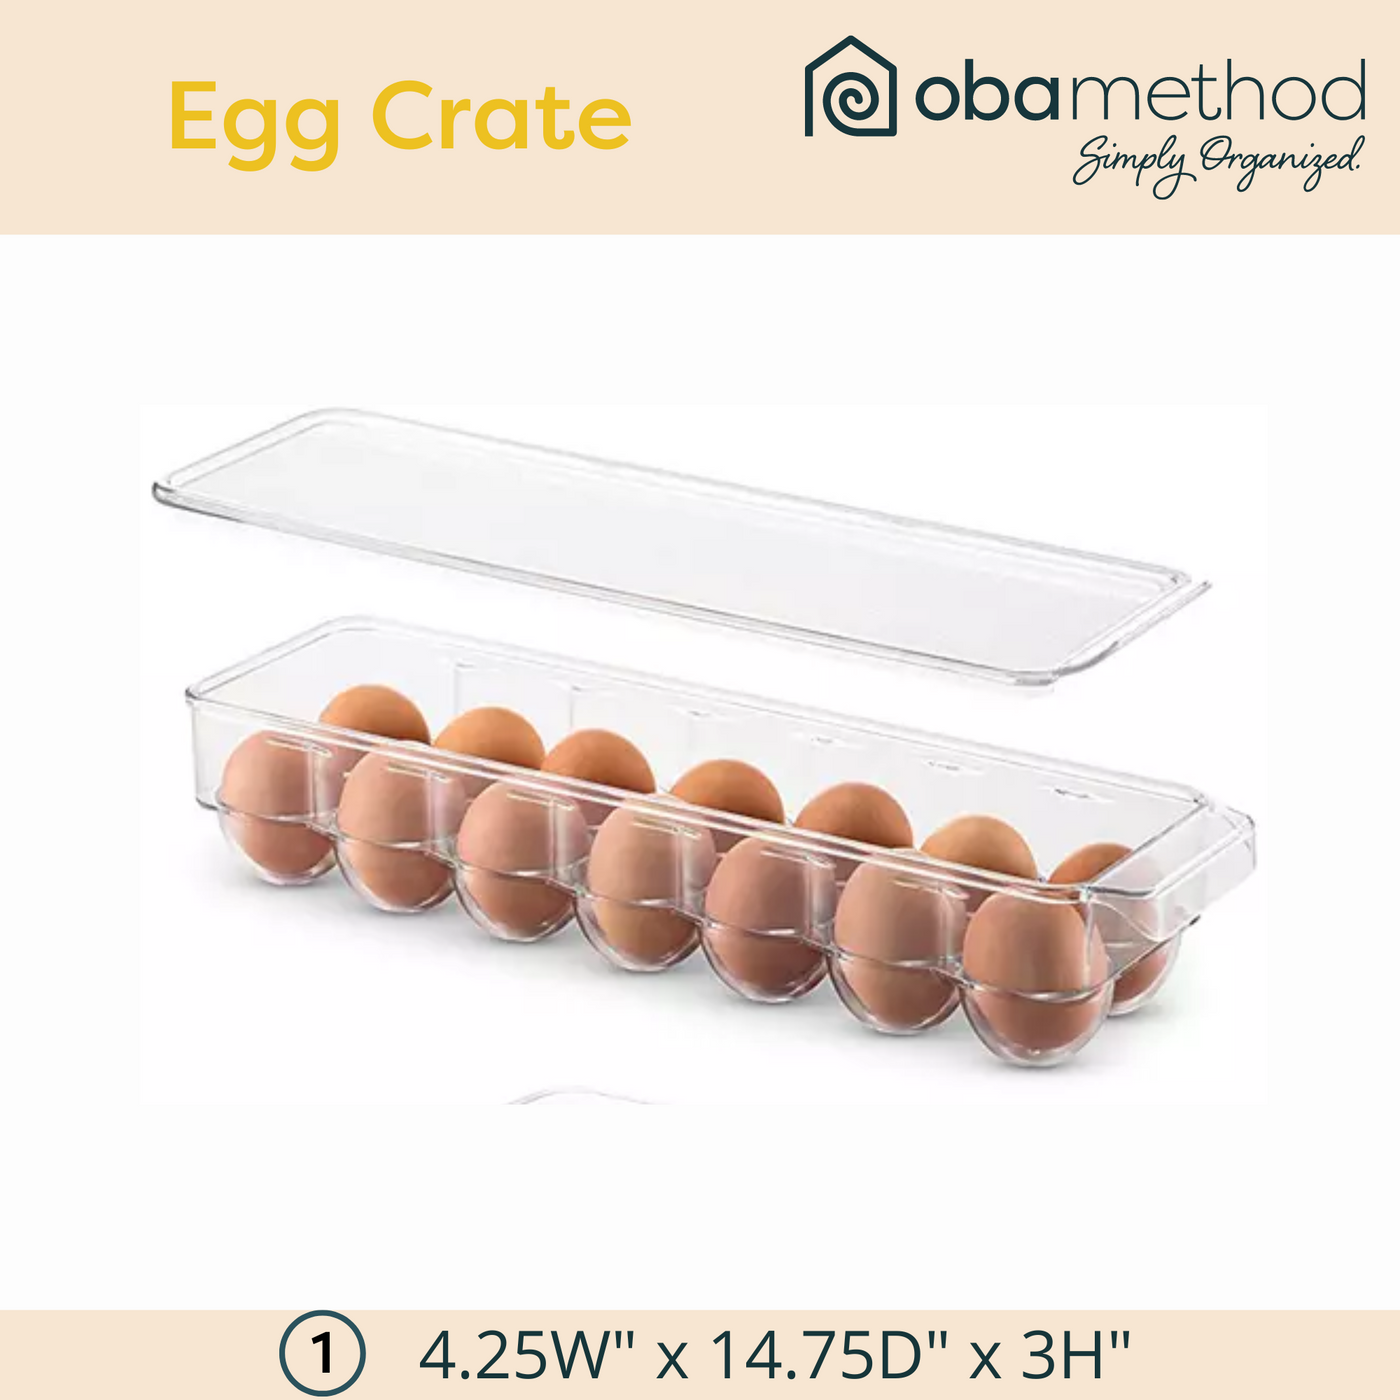 egg crate dimensions